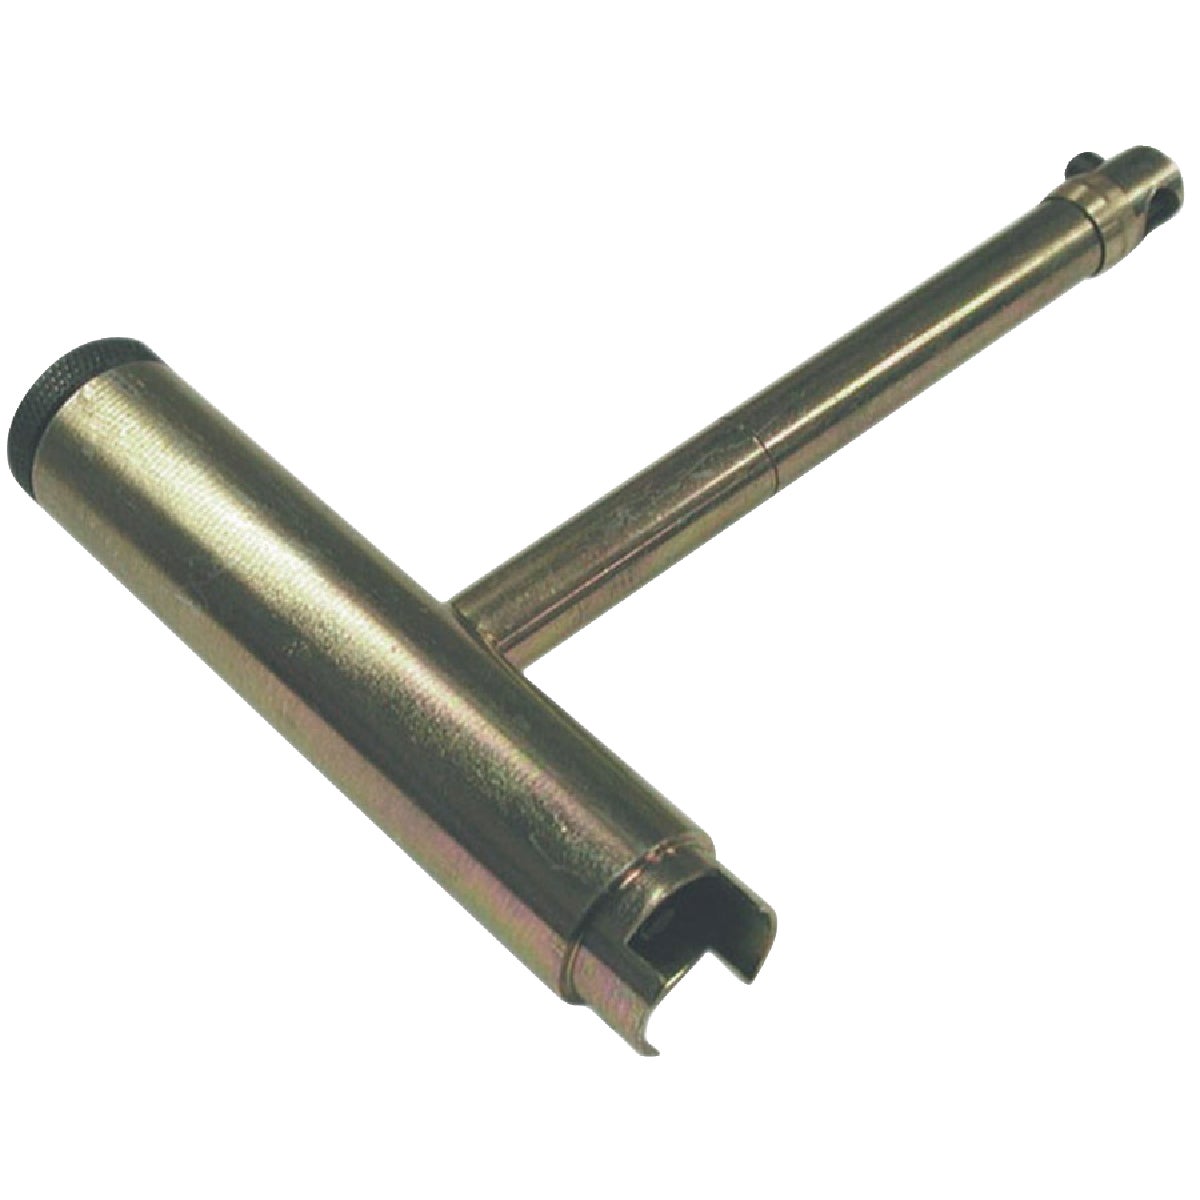 Item 440248, For Moen faucet stems and cartridges. Easy-to-use.